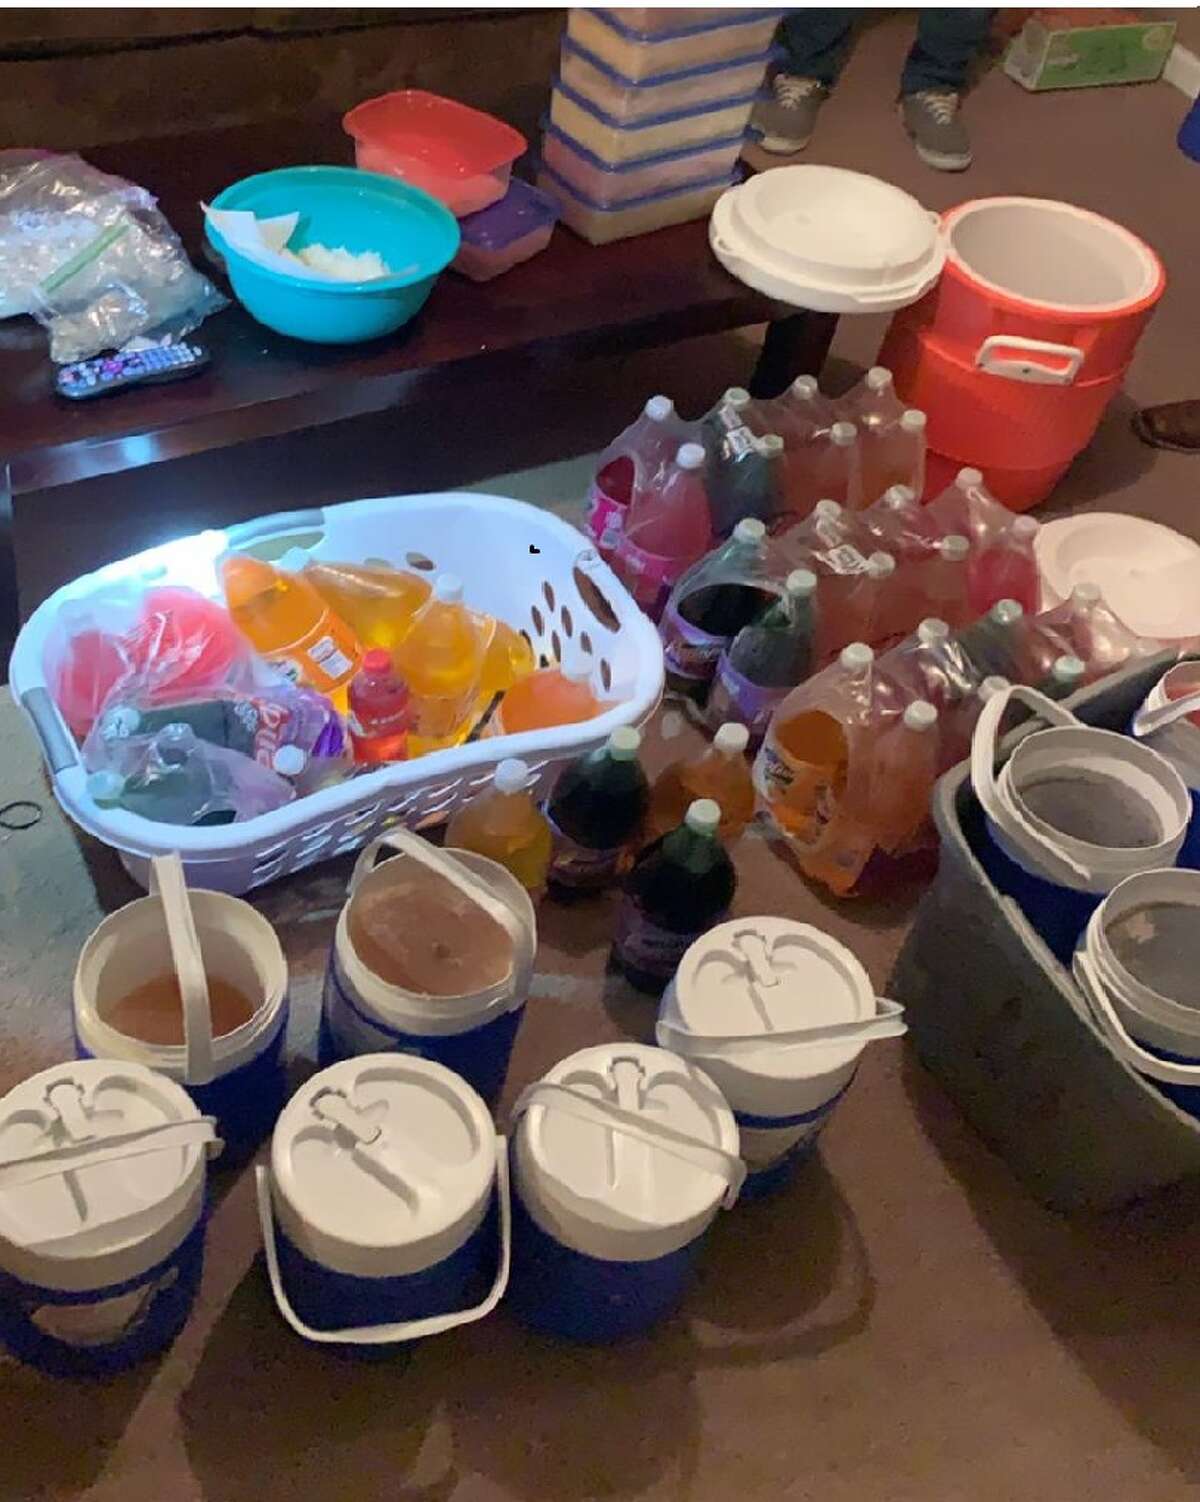 Houston Police seized more than $15 million worth of crystal meth at a northwest Houston home last week that is believed to have been a "storage house."